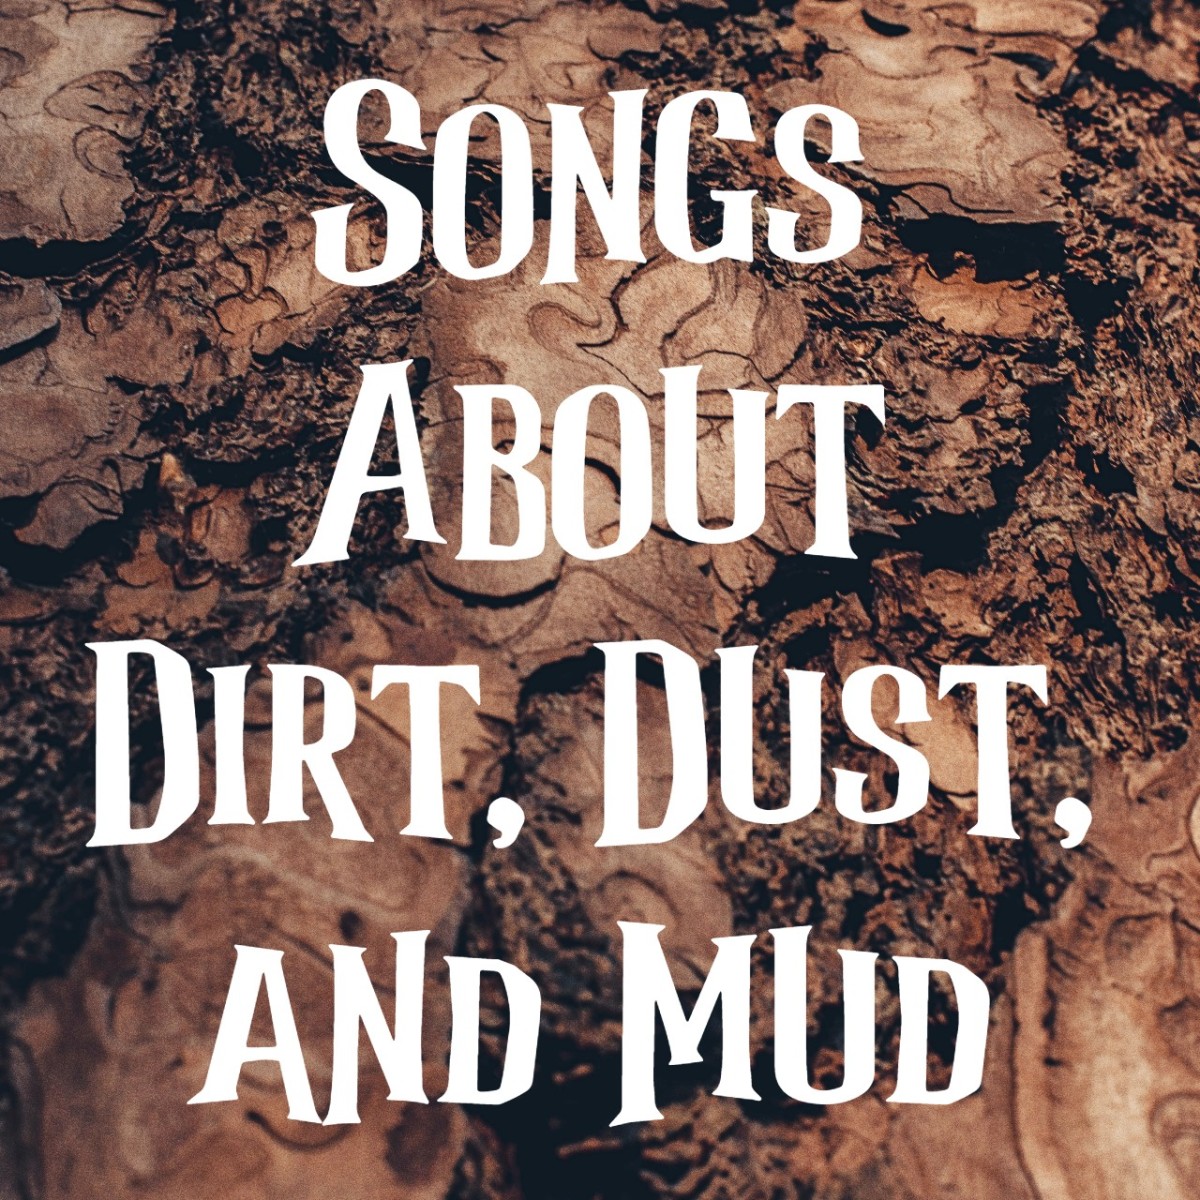 64 Songs About Dirt, Dust, and Mud